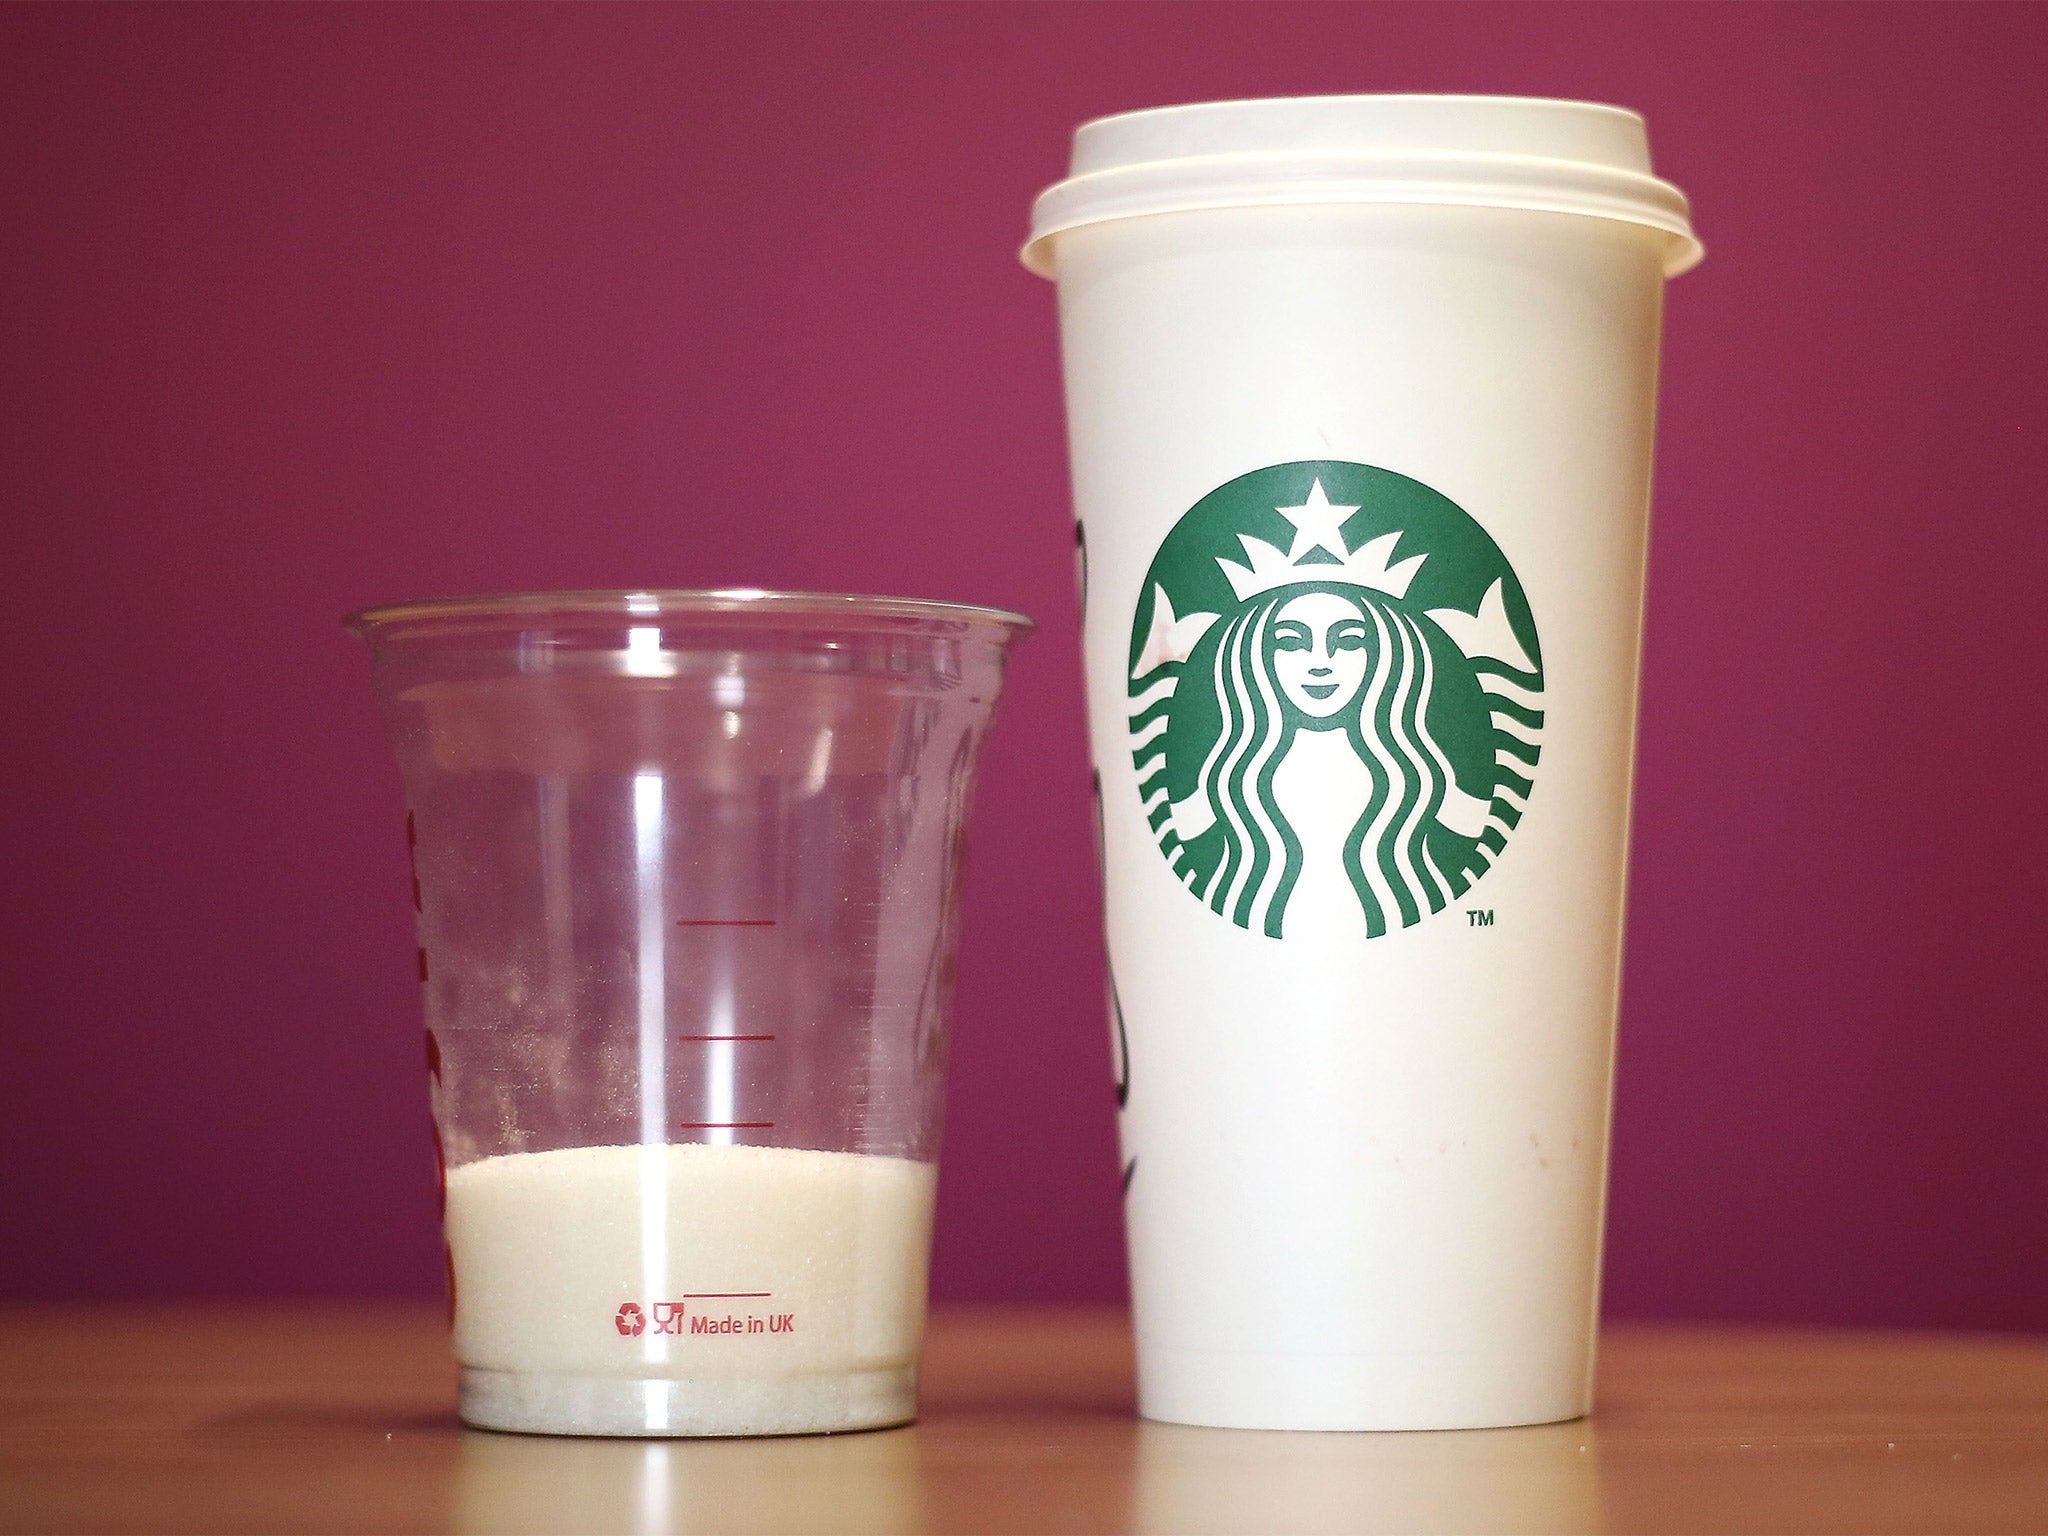 A cup of Starbucks' venti Grape with Chai, Orange and Cinnamon Hot Mulled Fruit which has a total of 25 teaspoons of sugar per serving